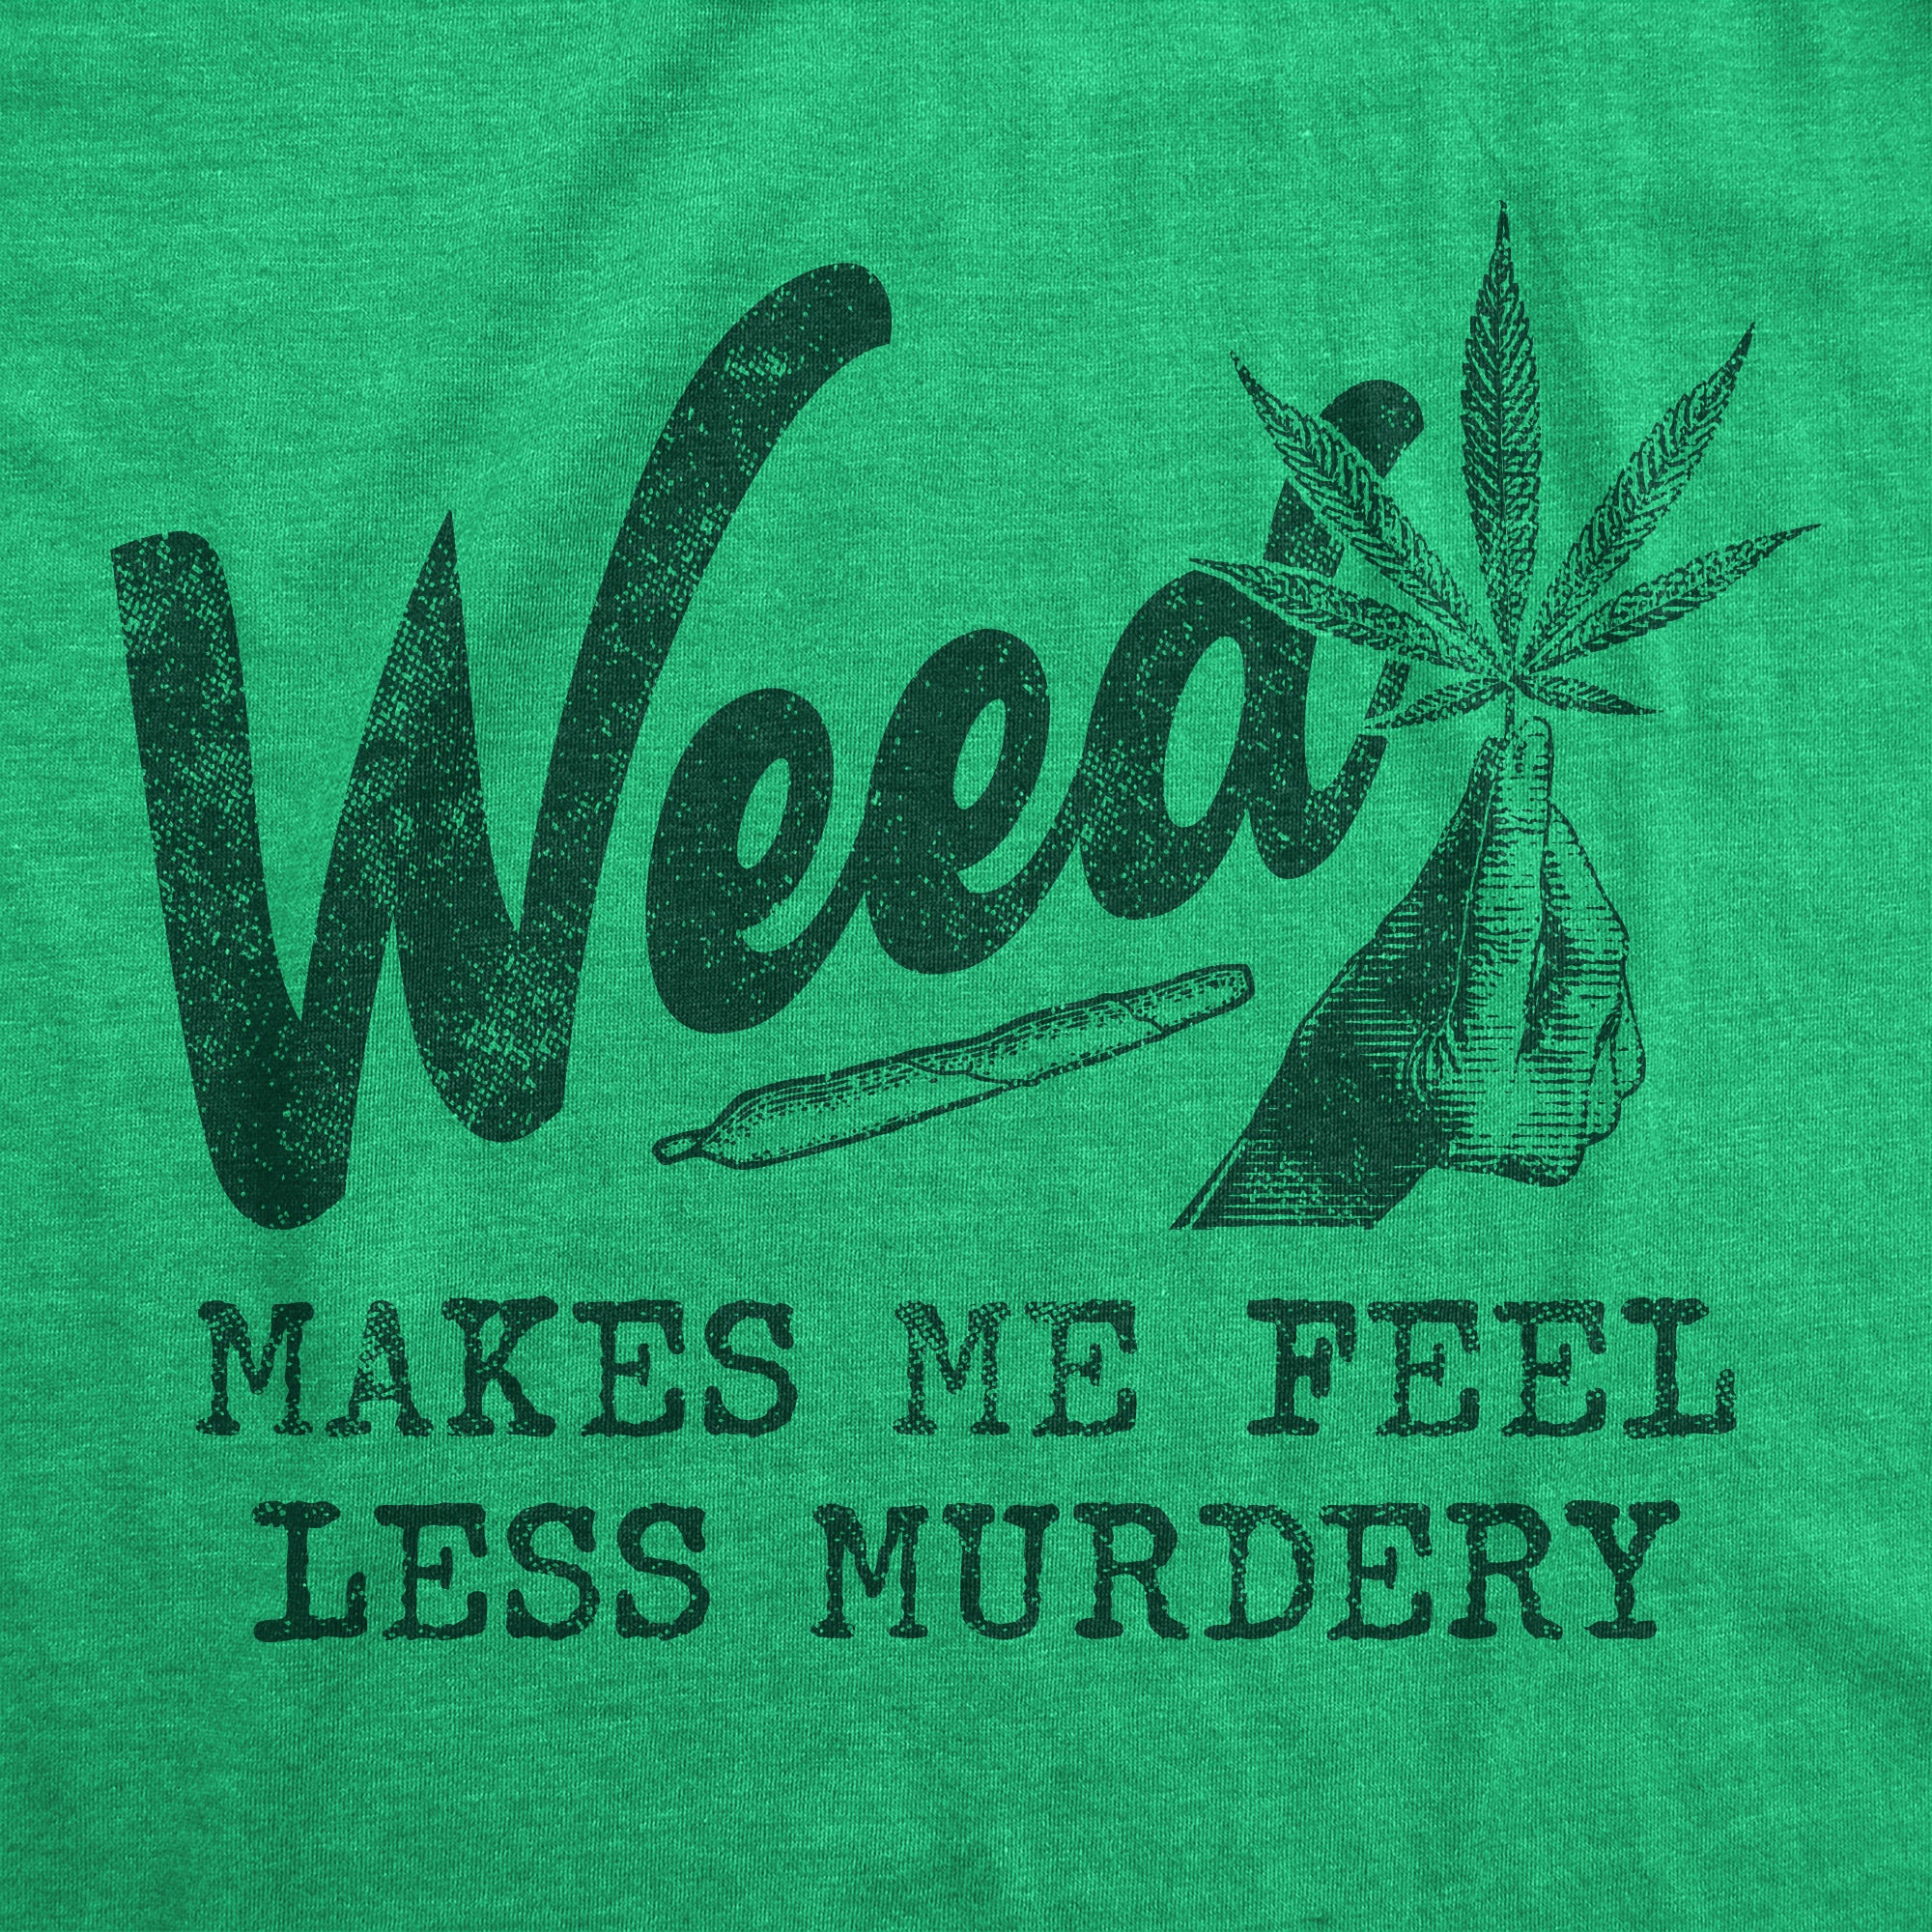 Funny Heather Green Weed Makes Me Feel Less Murdery Womens T Shirt Nerdy 420 Introvert Tee